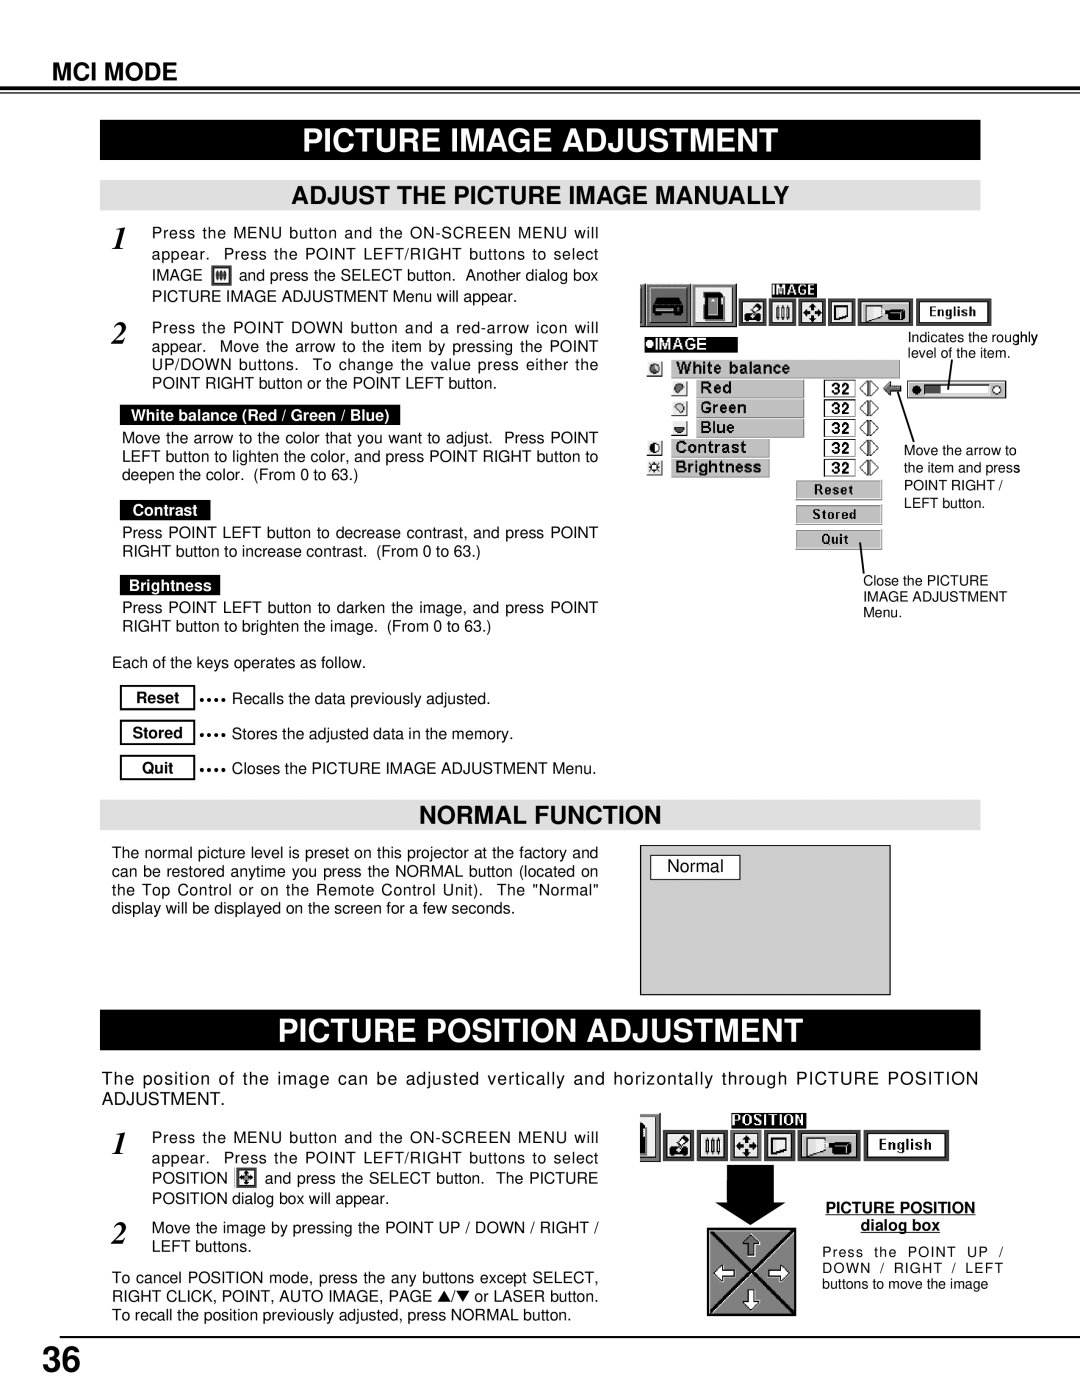 BOXLIGHT CP-33t Picture Image Adjustment, Adjust The Picture Image Manually, Picture Position Adjustment, Mci Mode, Normal 